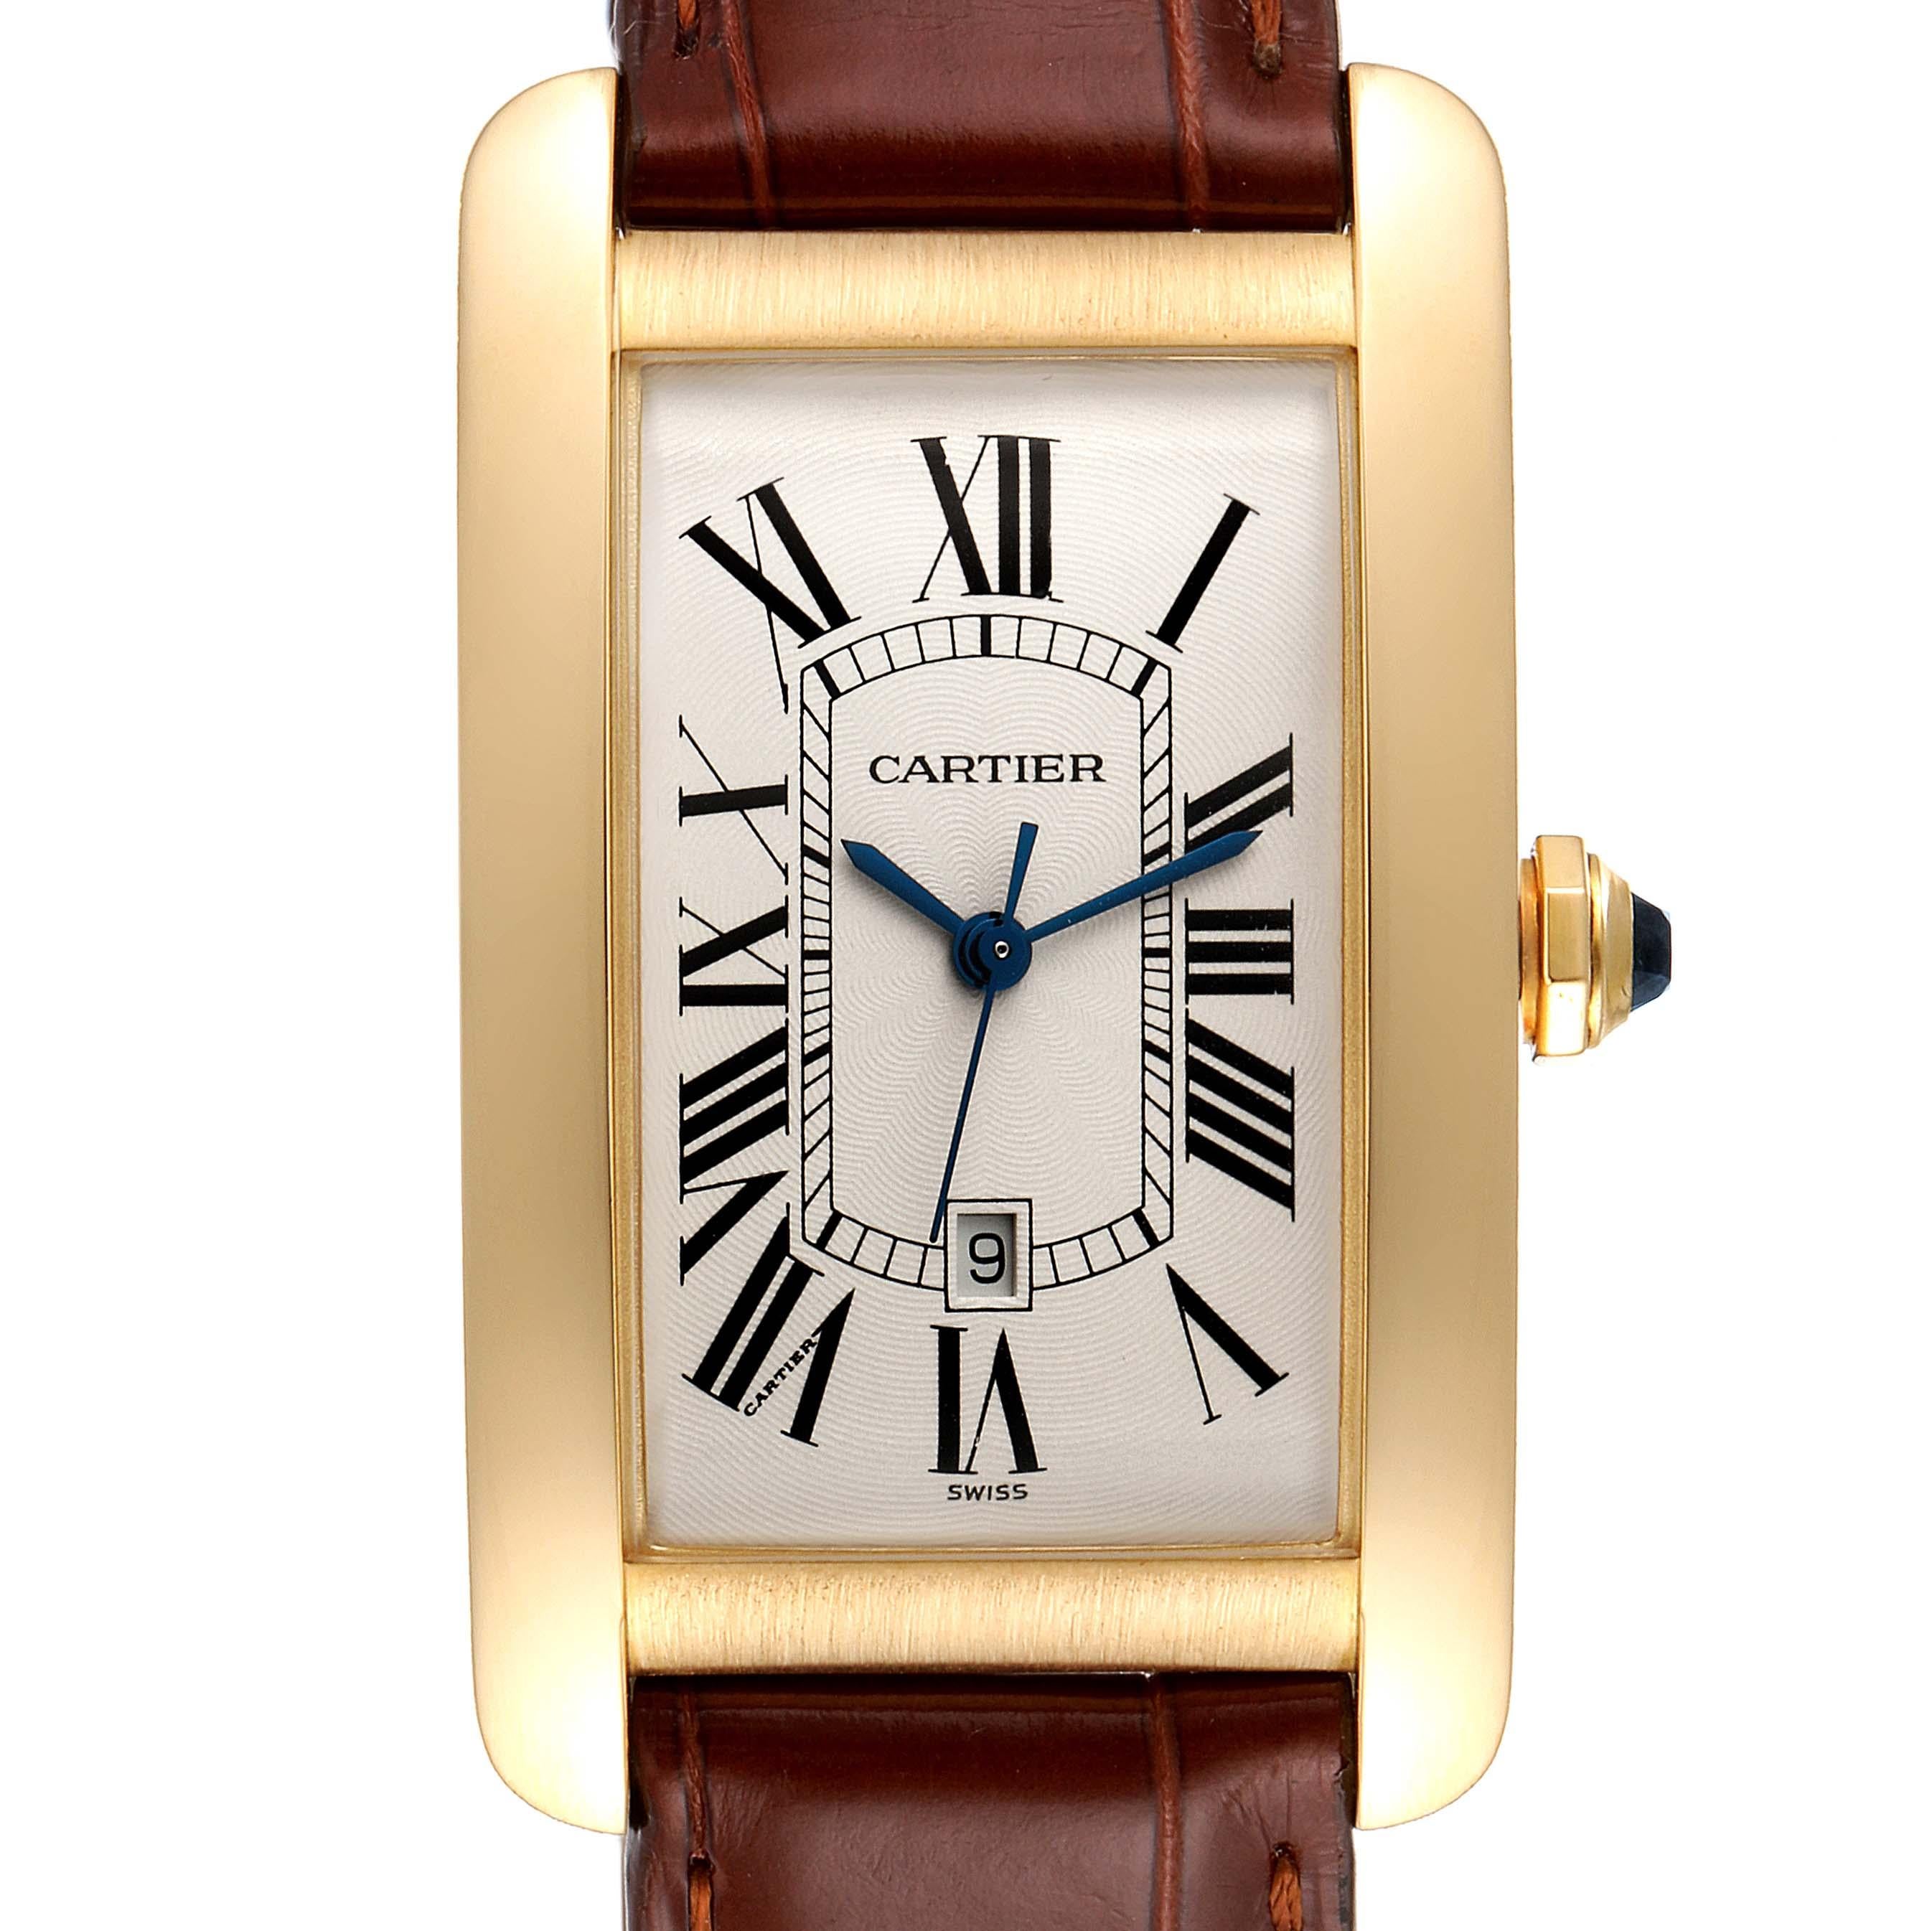 Cartier Tank Americaine Yellow Gold Automatic Mens Watch W2603156. Automatic self-winding movement. 18K yellow gold case 26.6 x 45.1 mm. Circular grained crown set with faceted blue sapphire. . Scratch resistant sapphire crystal. Silvered guiloche